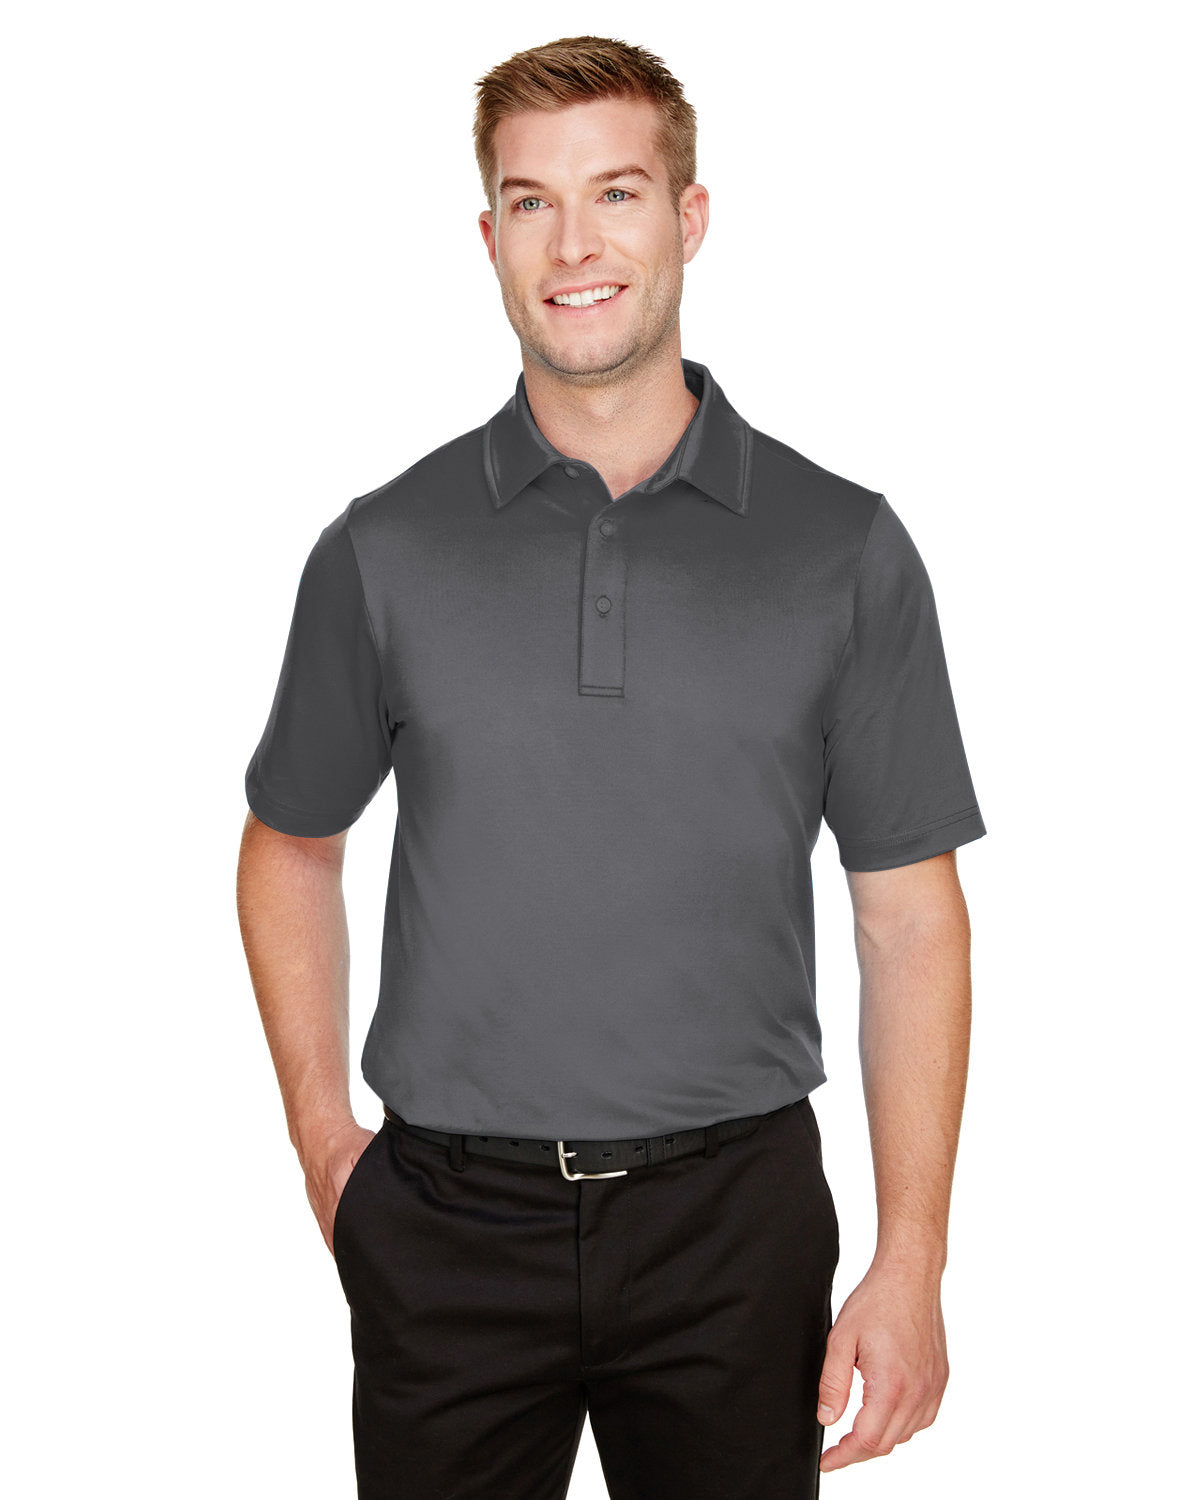 Rainwater's Stretch Performance Solid Polo In Grey - Rainwater's Men's Clothing and Tuxedo Rental